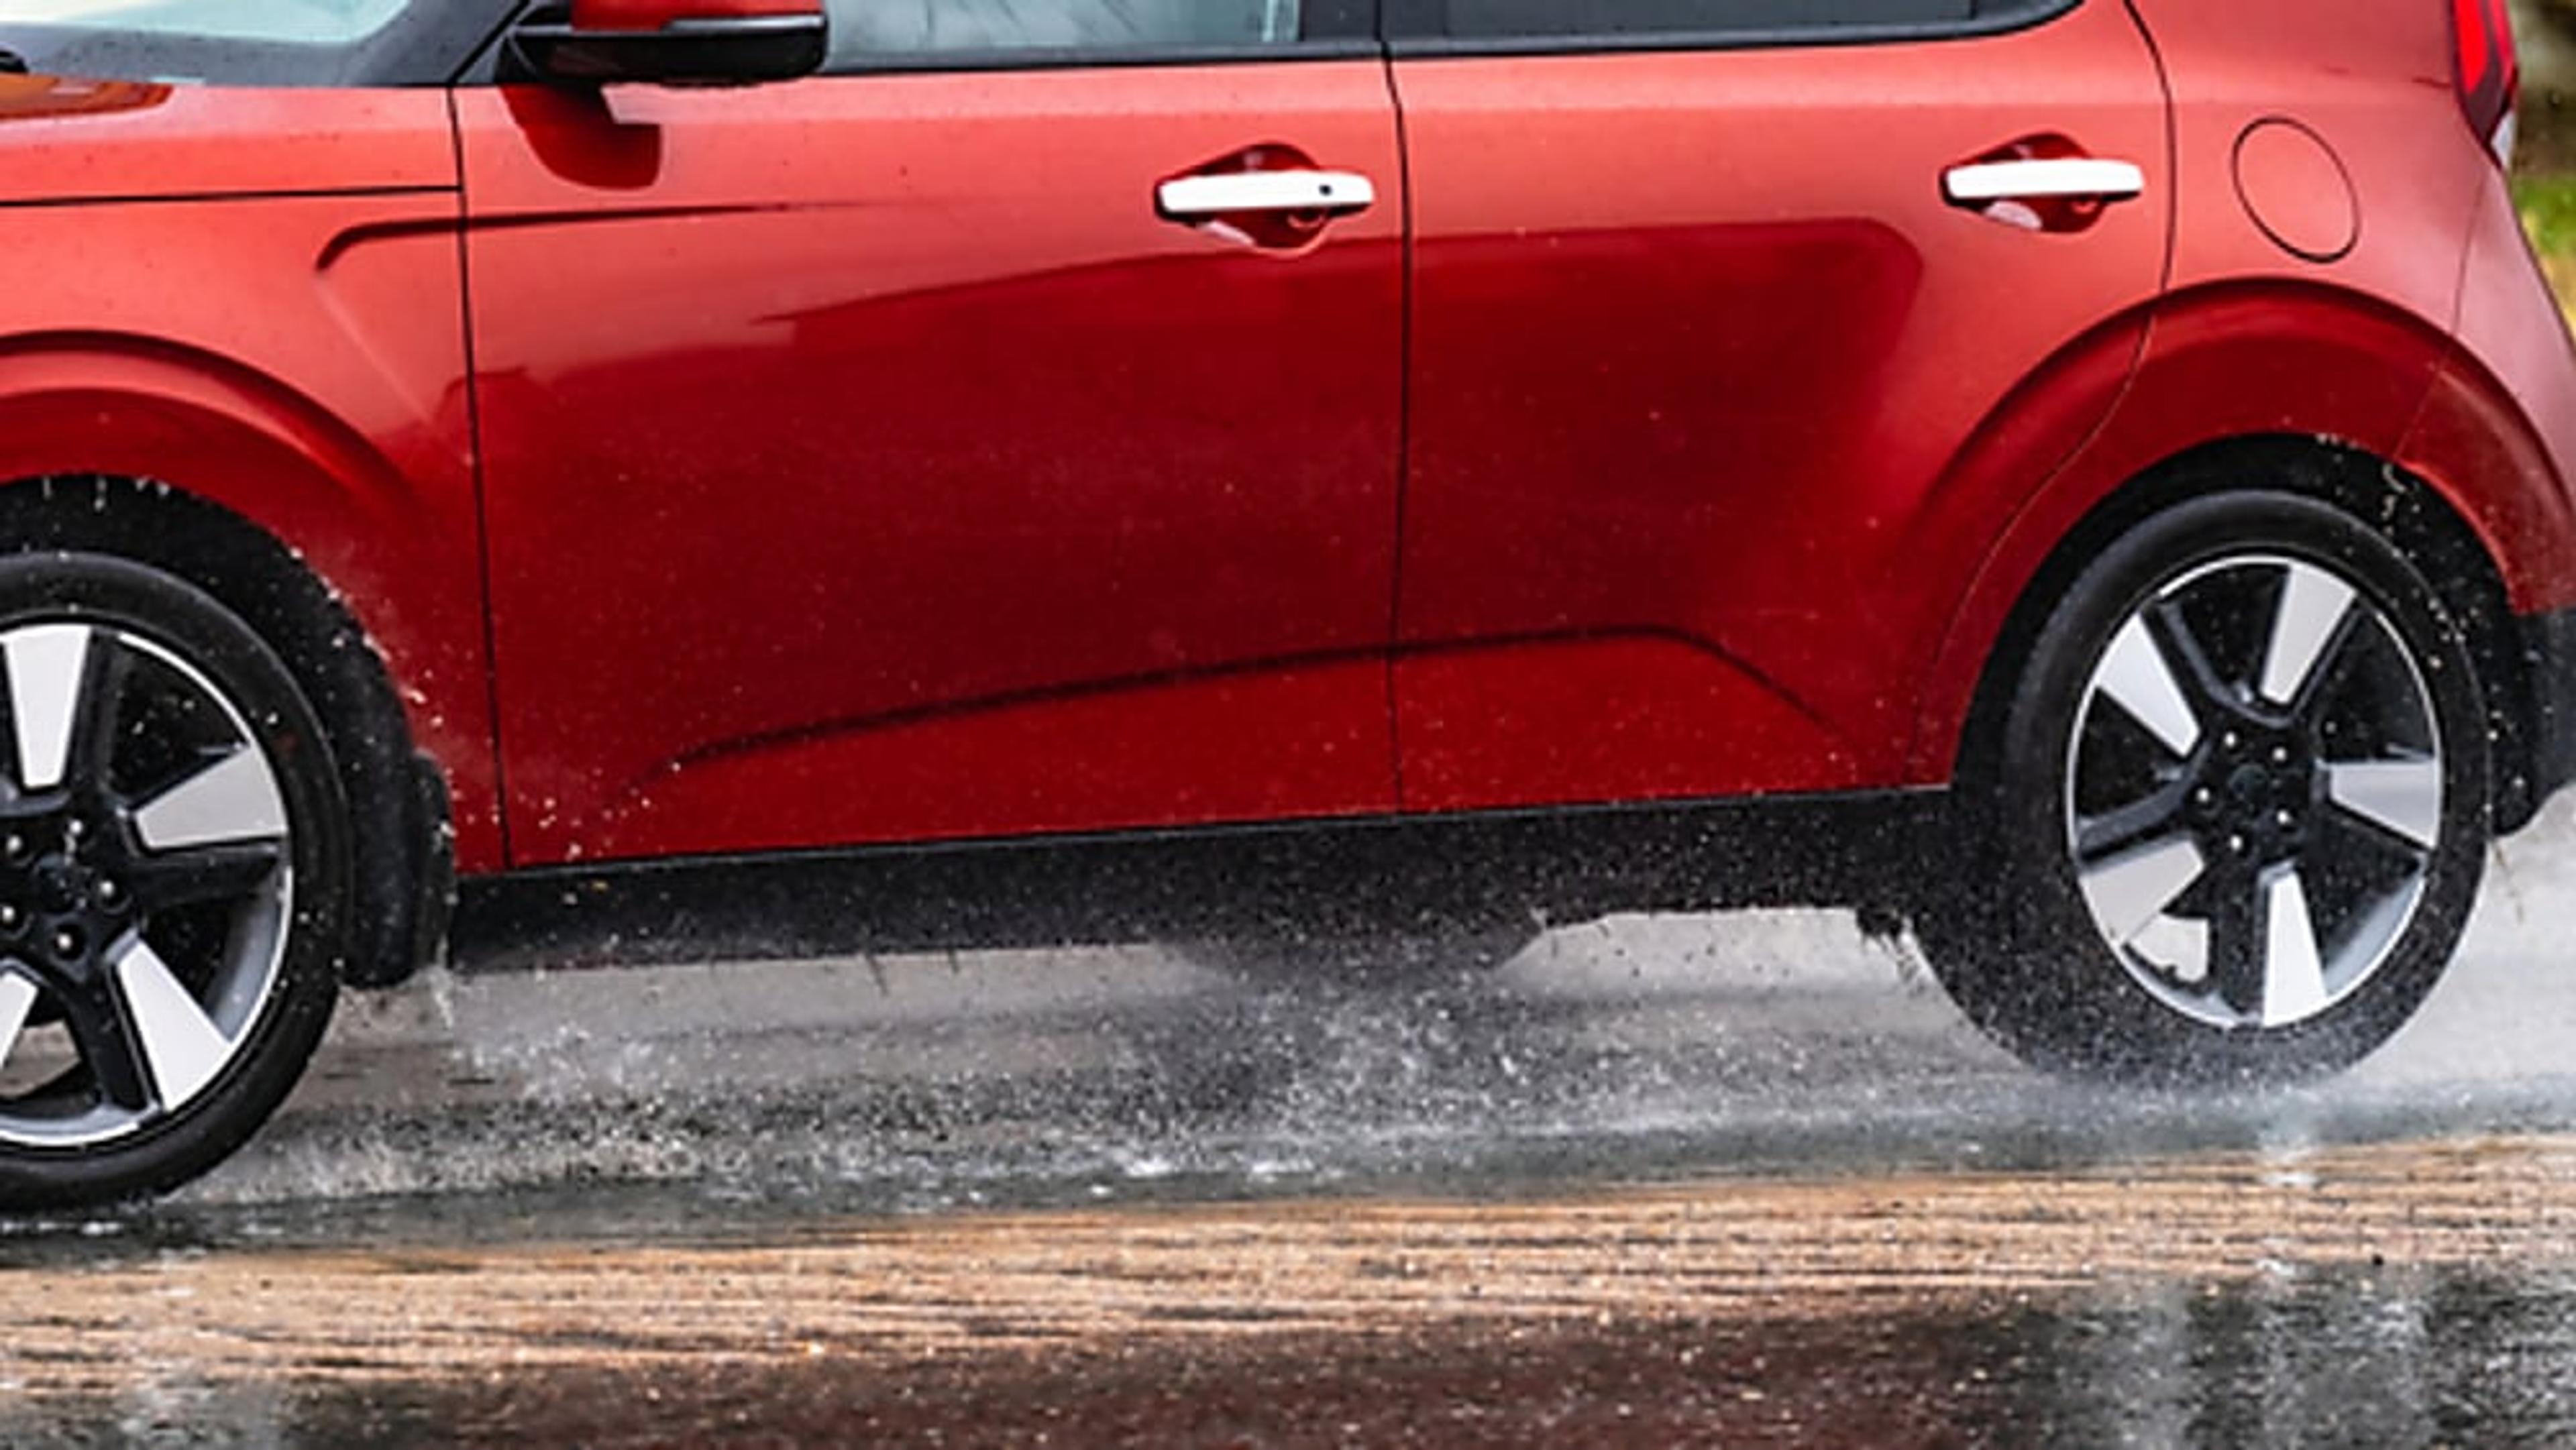 A red SUV driving on a wet road.